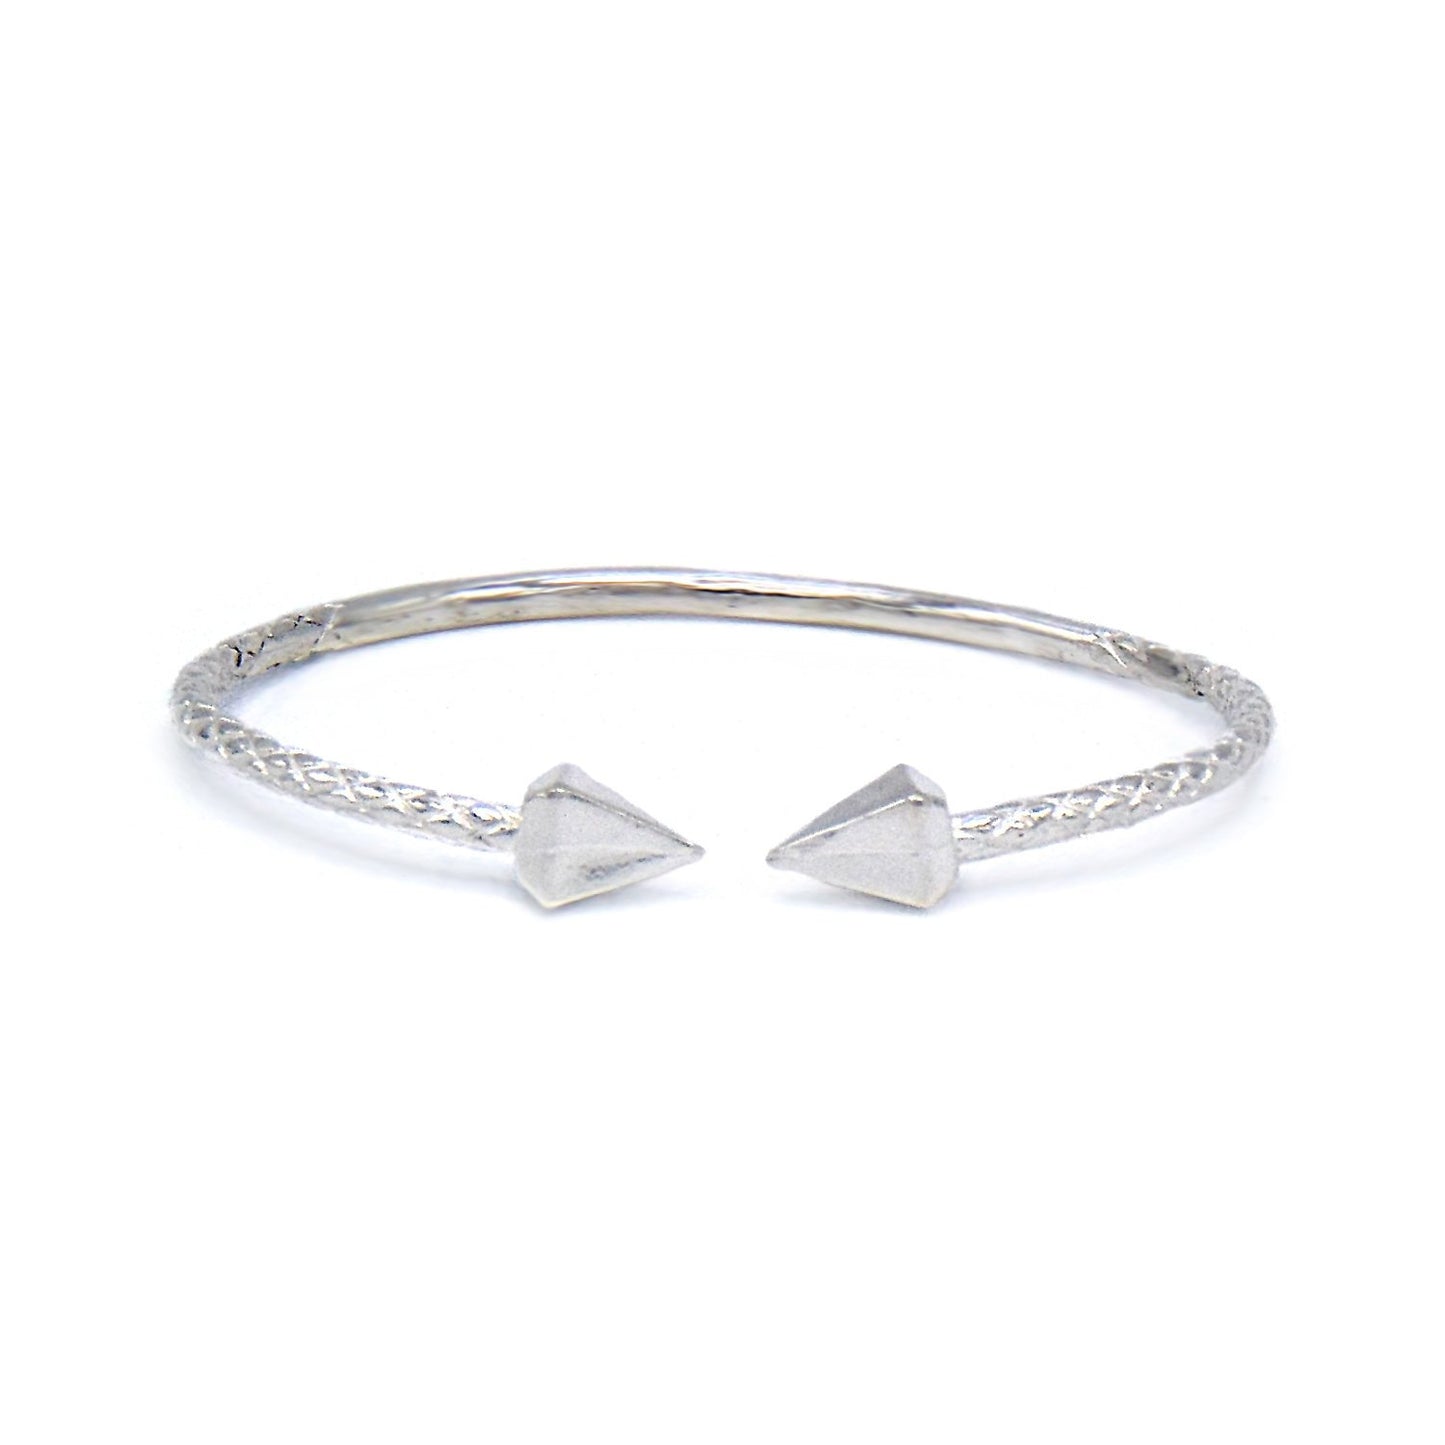 Large Pyramid Ends .925 Sterling Silver West Indian Bangle (MADE IN USA) - Betterjewelry